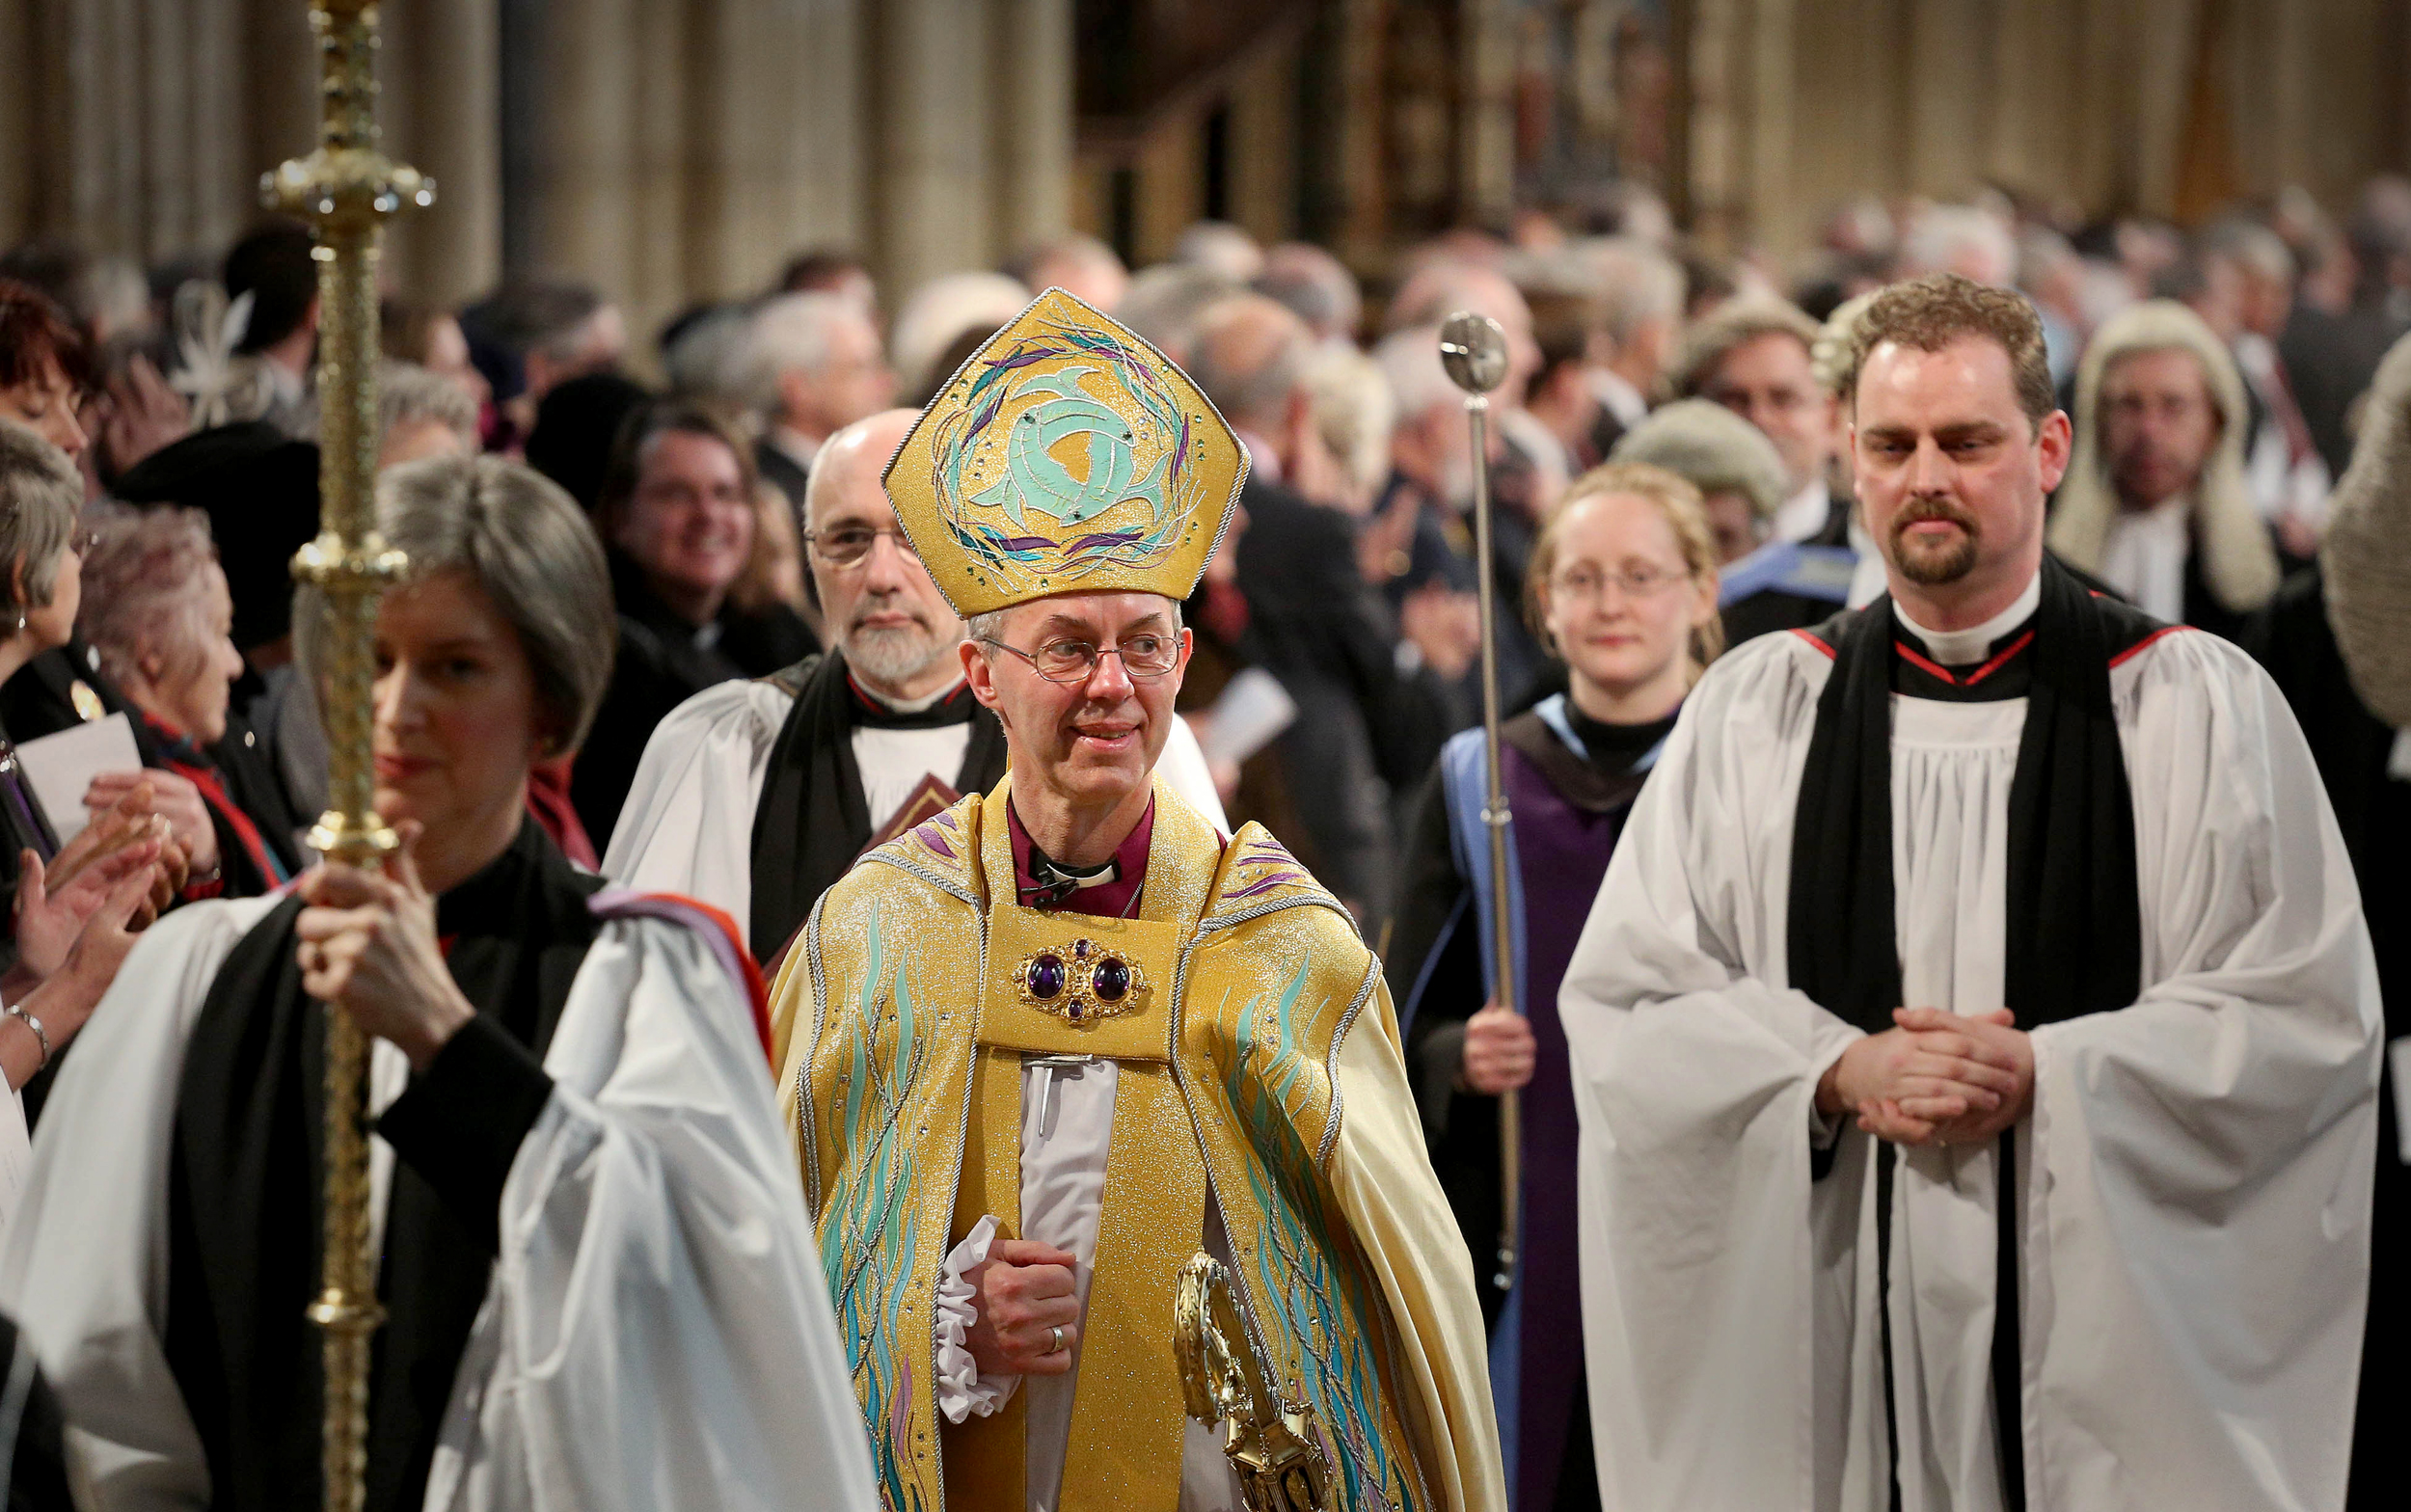 Church of England sets up $120m fund after slavery apology